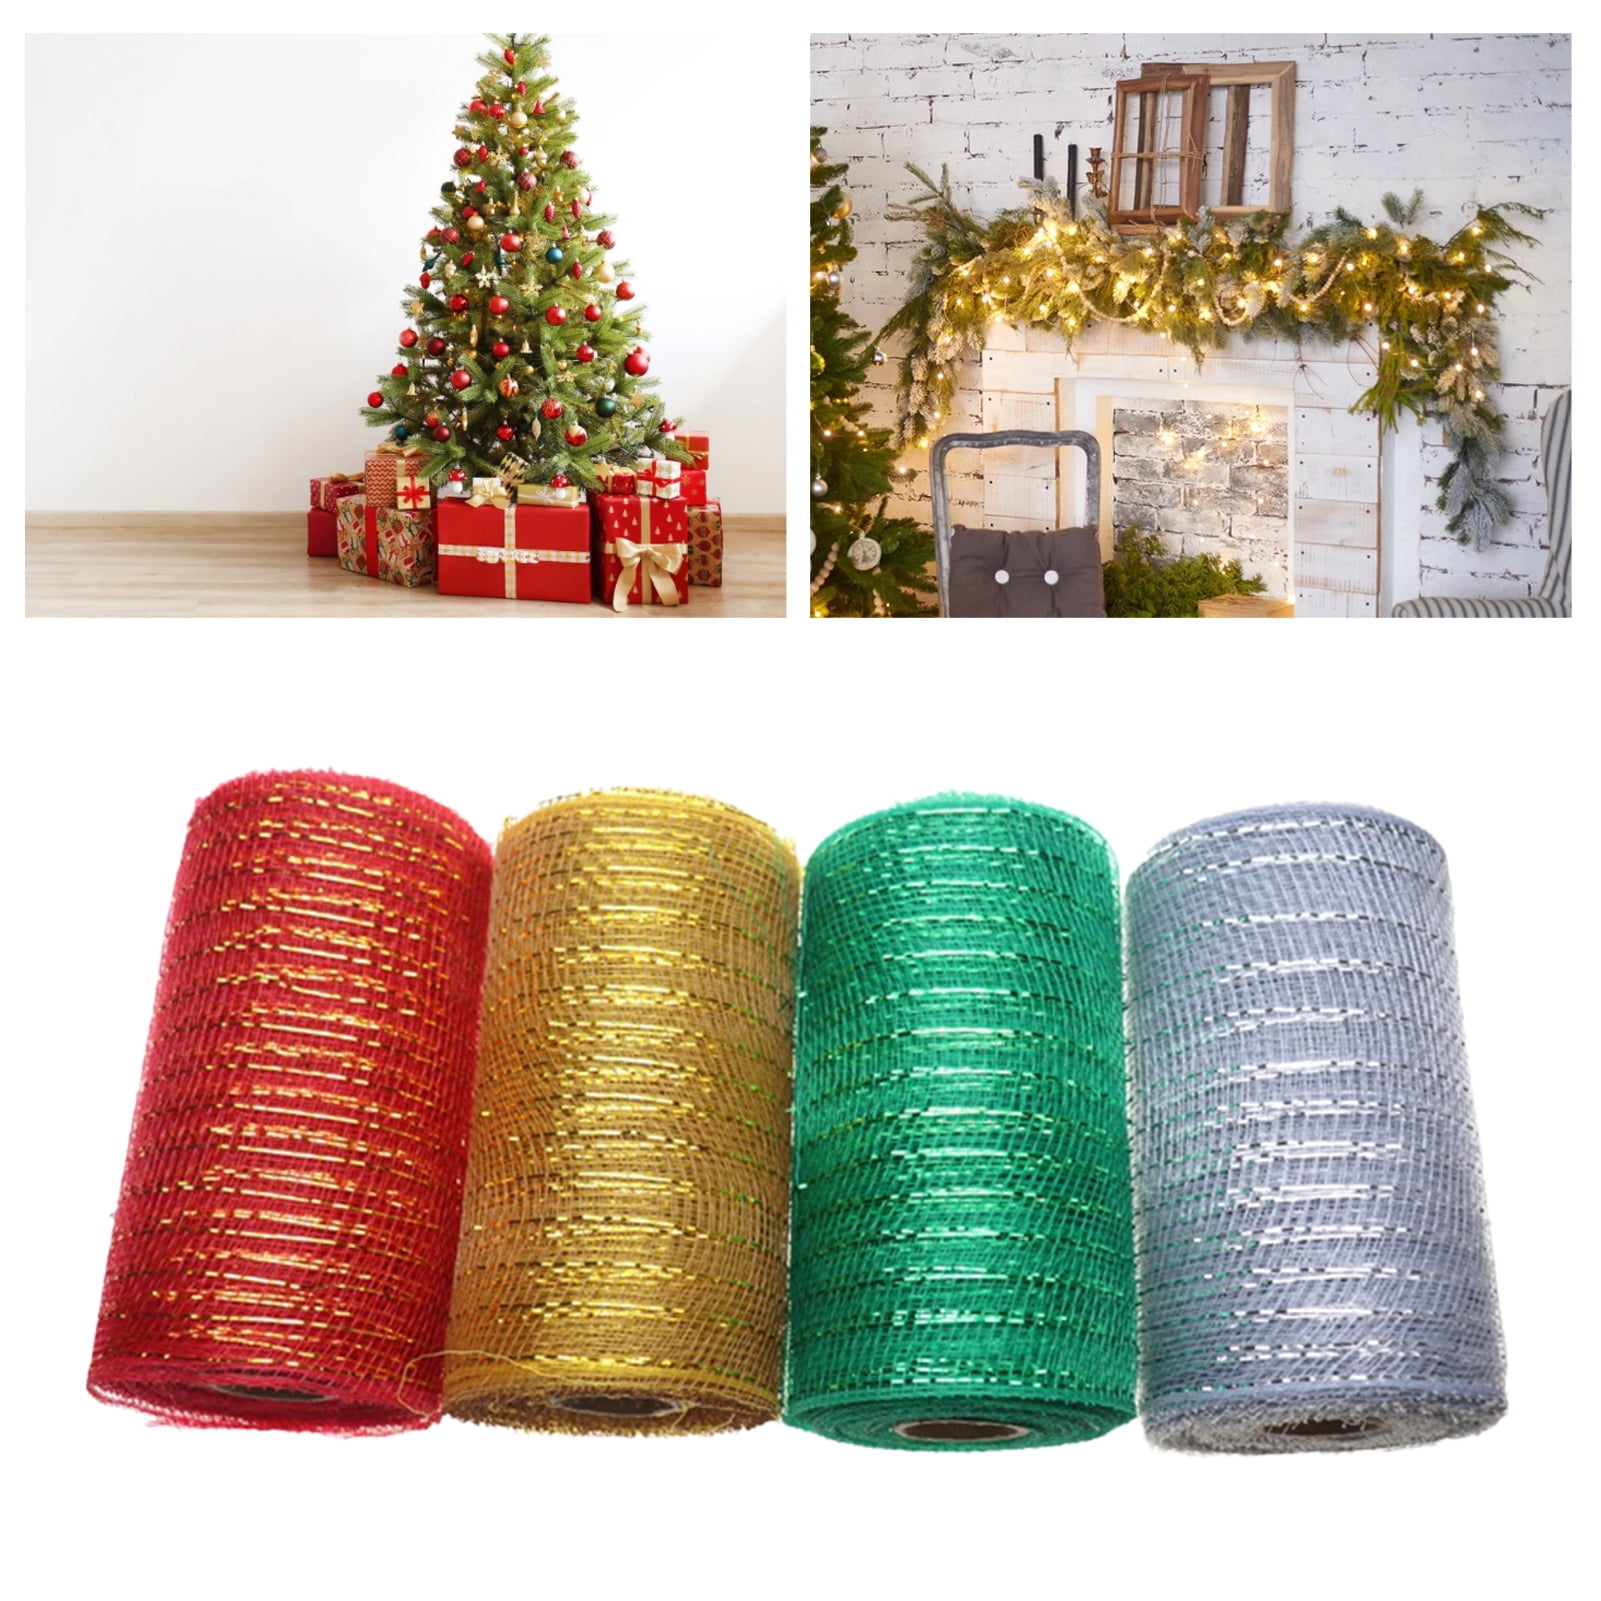 6 Rolls Poly Burlap Mesh 10 inch x 30 Feet Deco Ribbons Mesh Decor Poly Mesh Wrap for Swags Bows Home Party Christmas Decoration (Black White Blue)